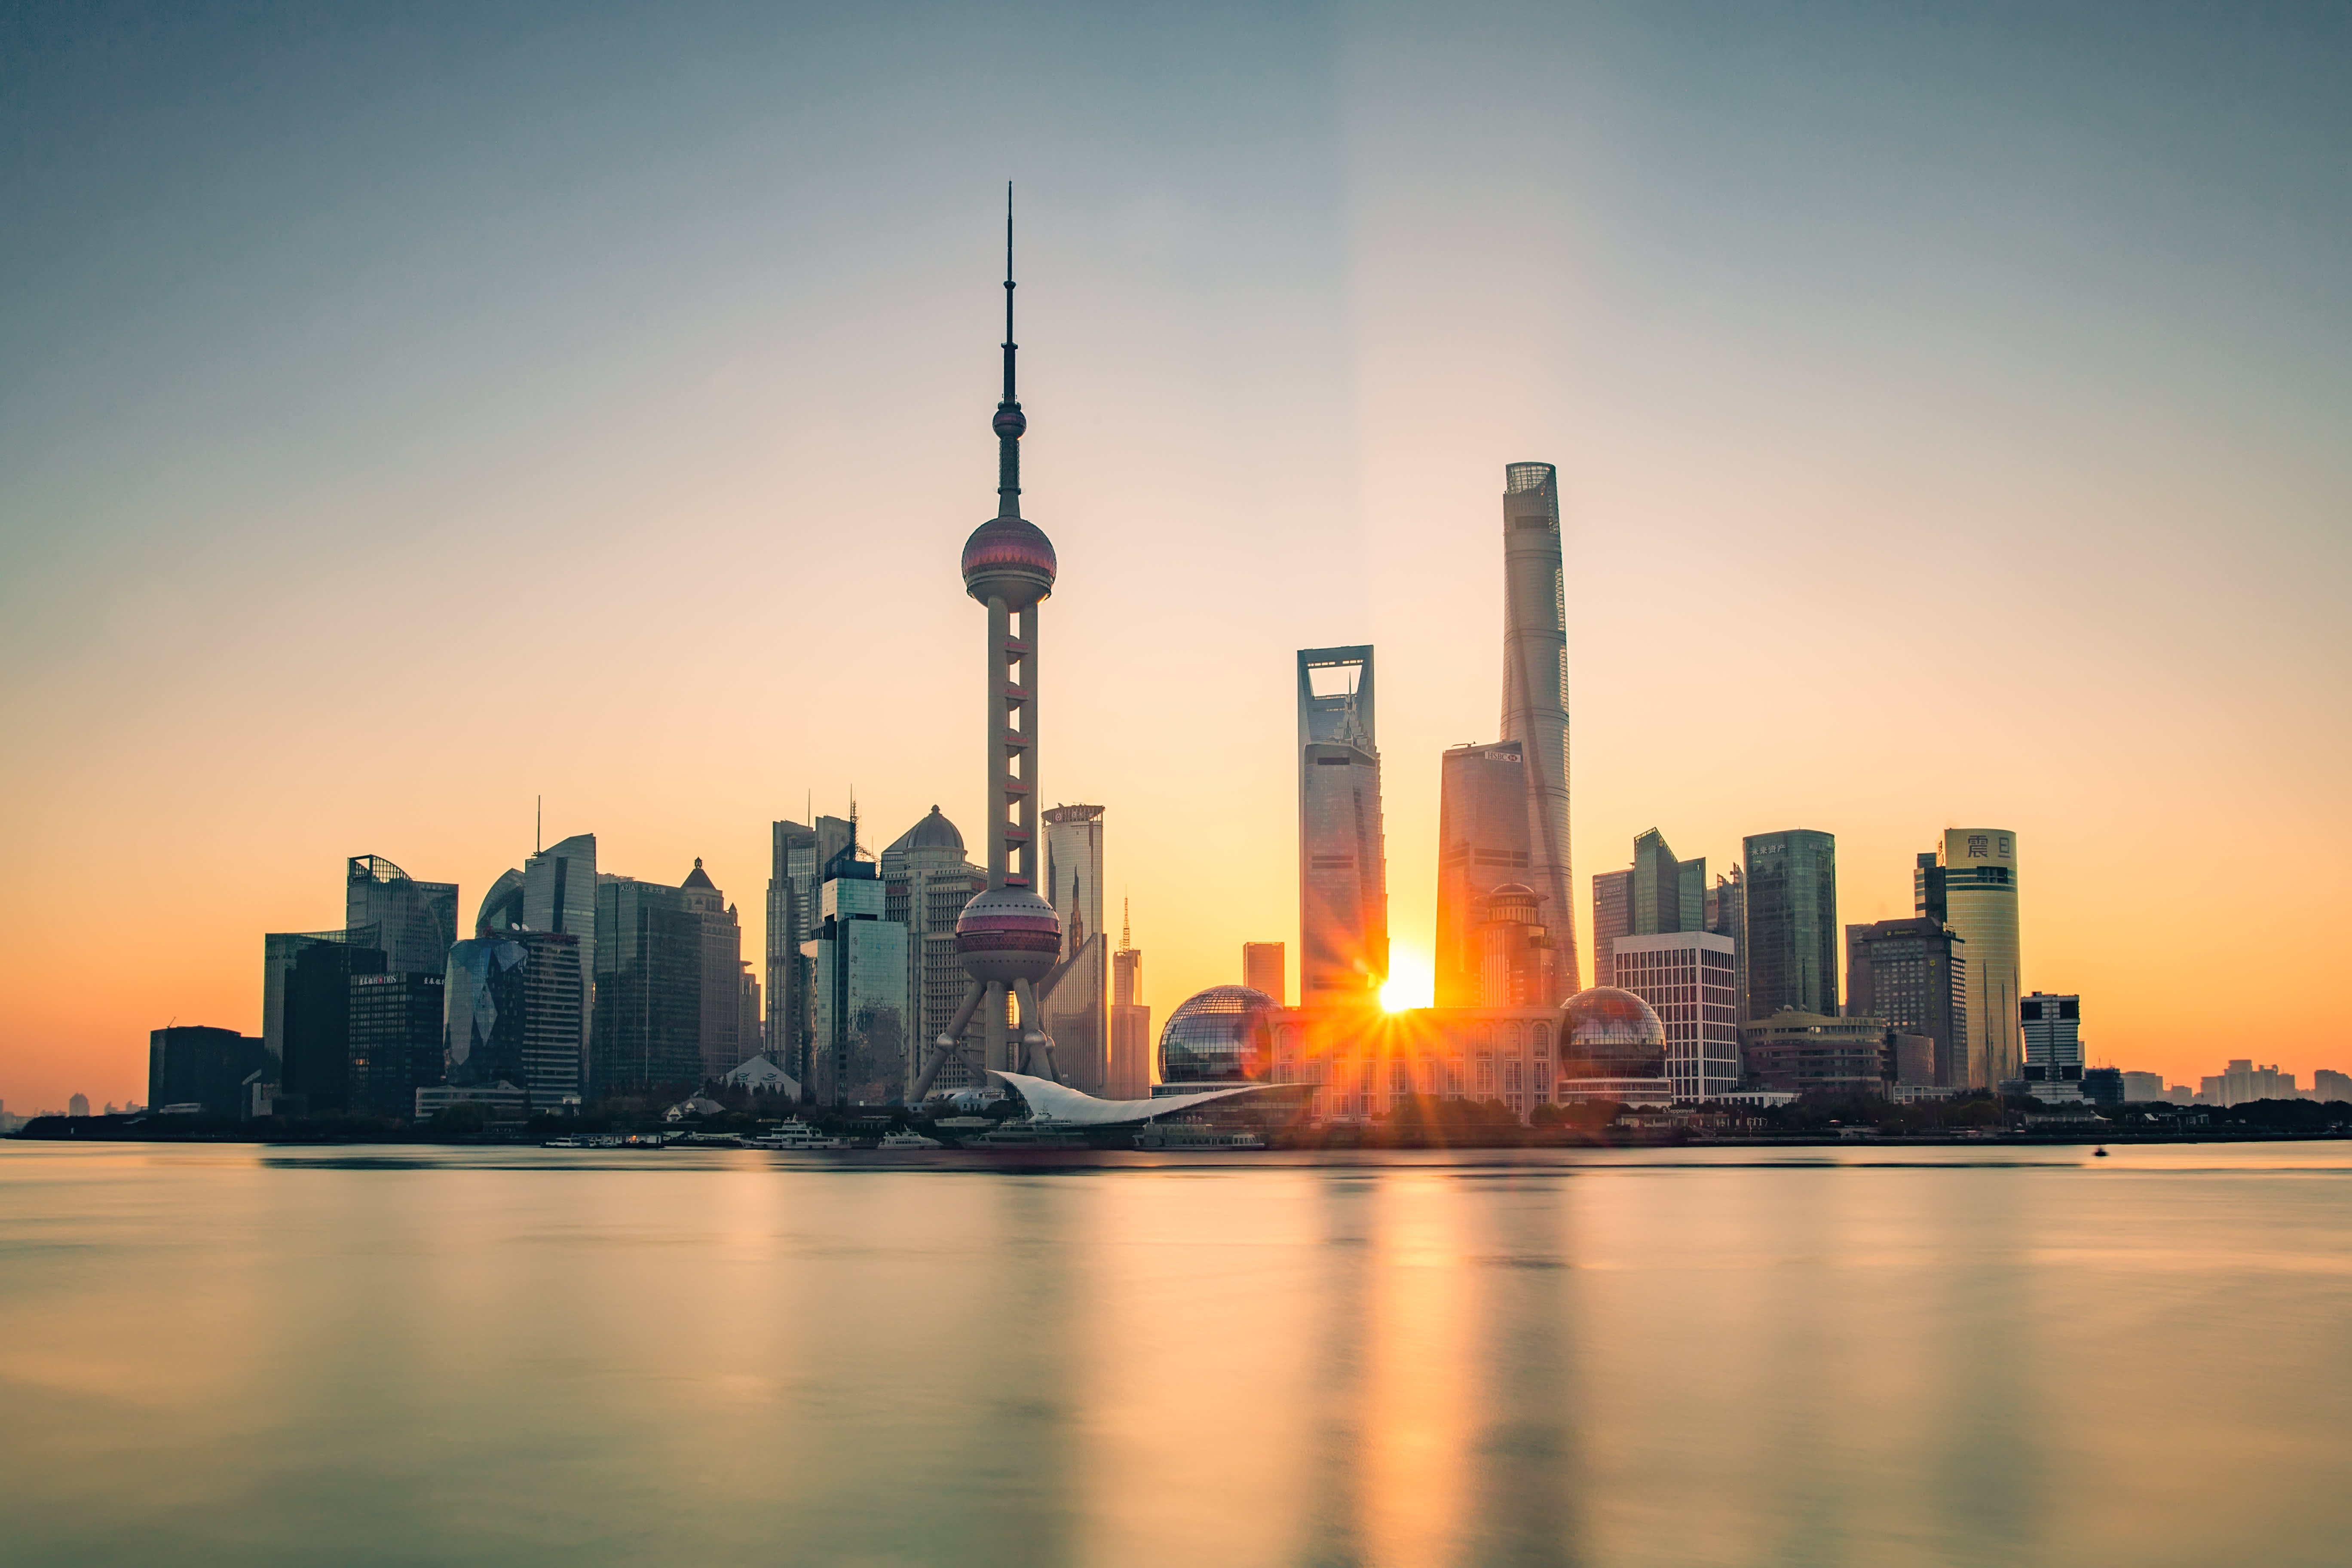 Shanghai Pudong district at sunrise